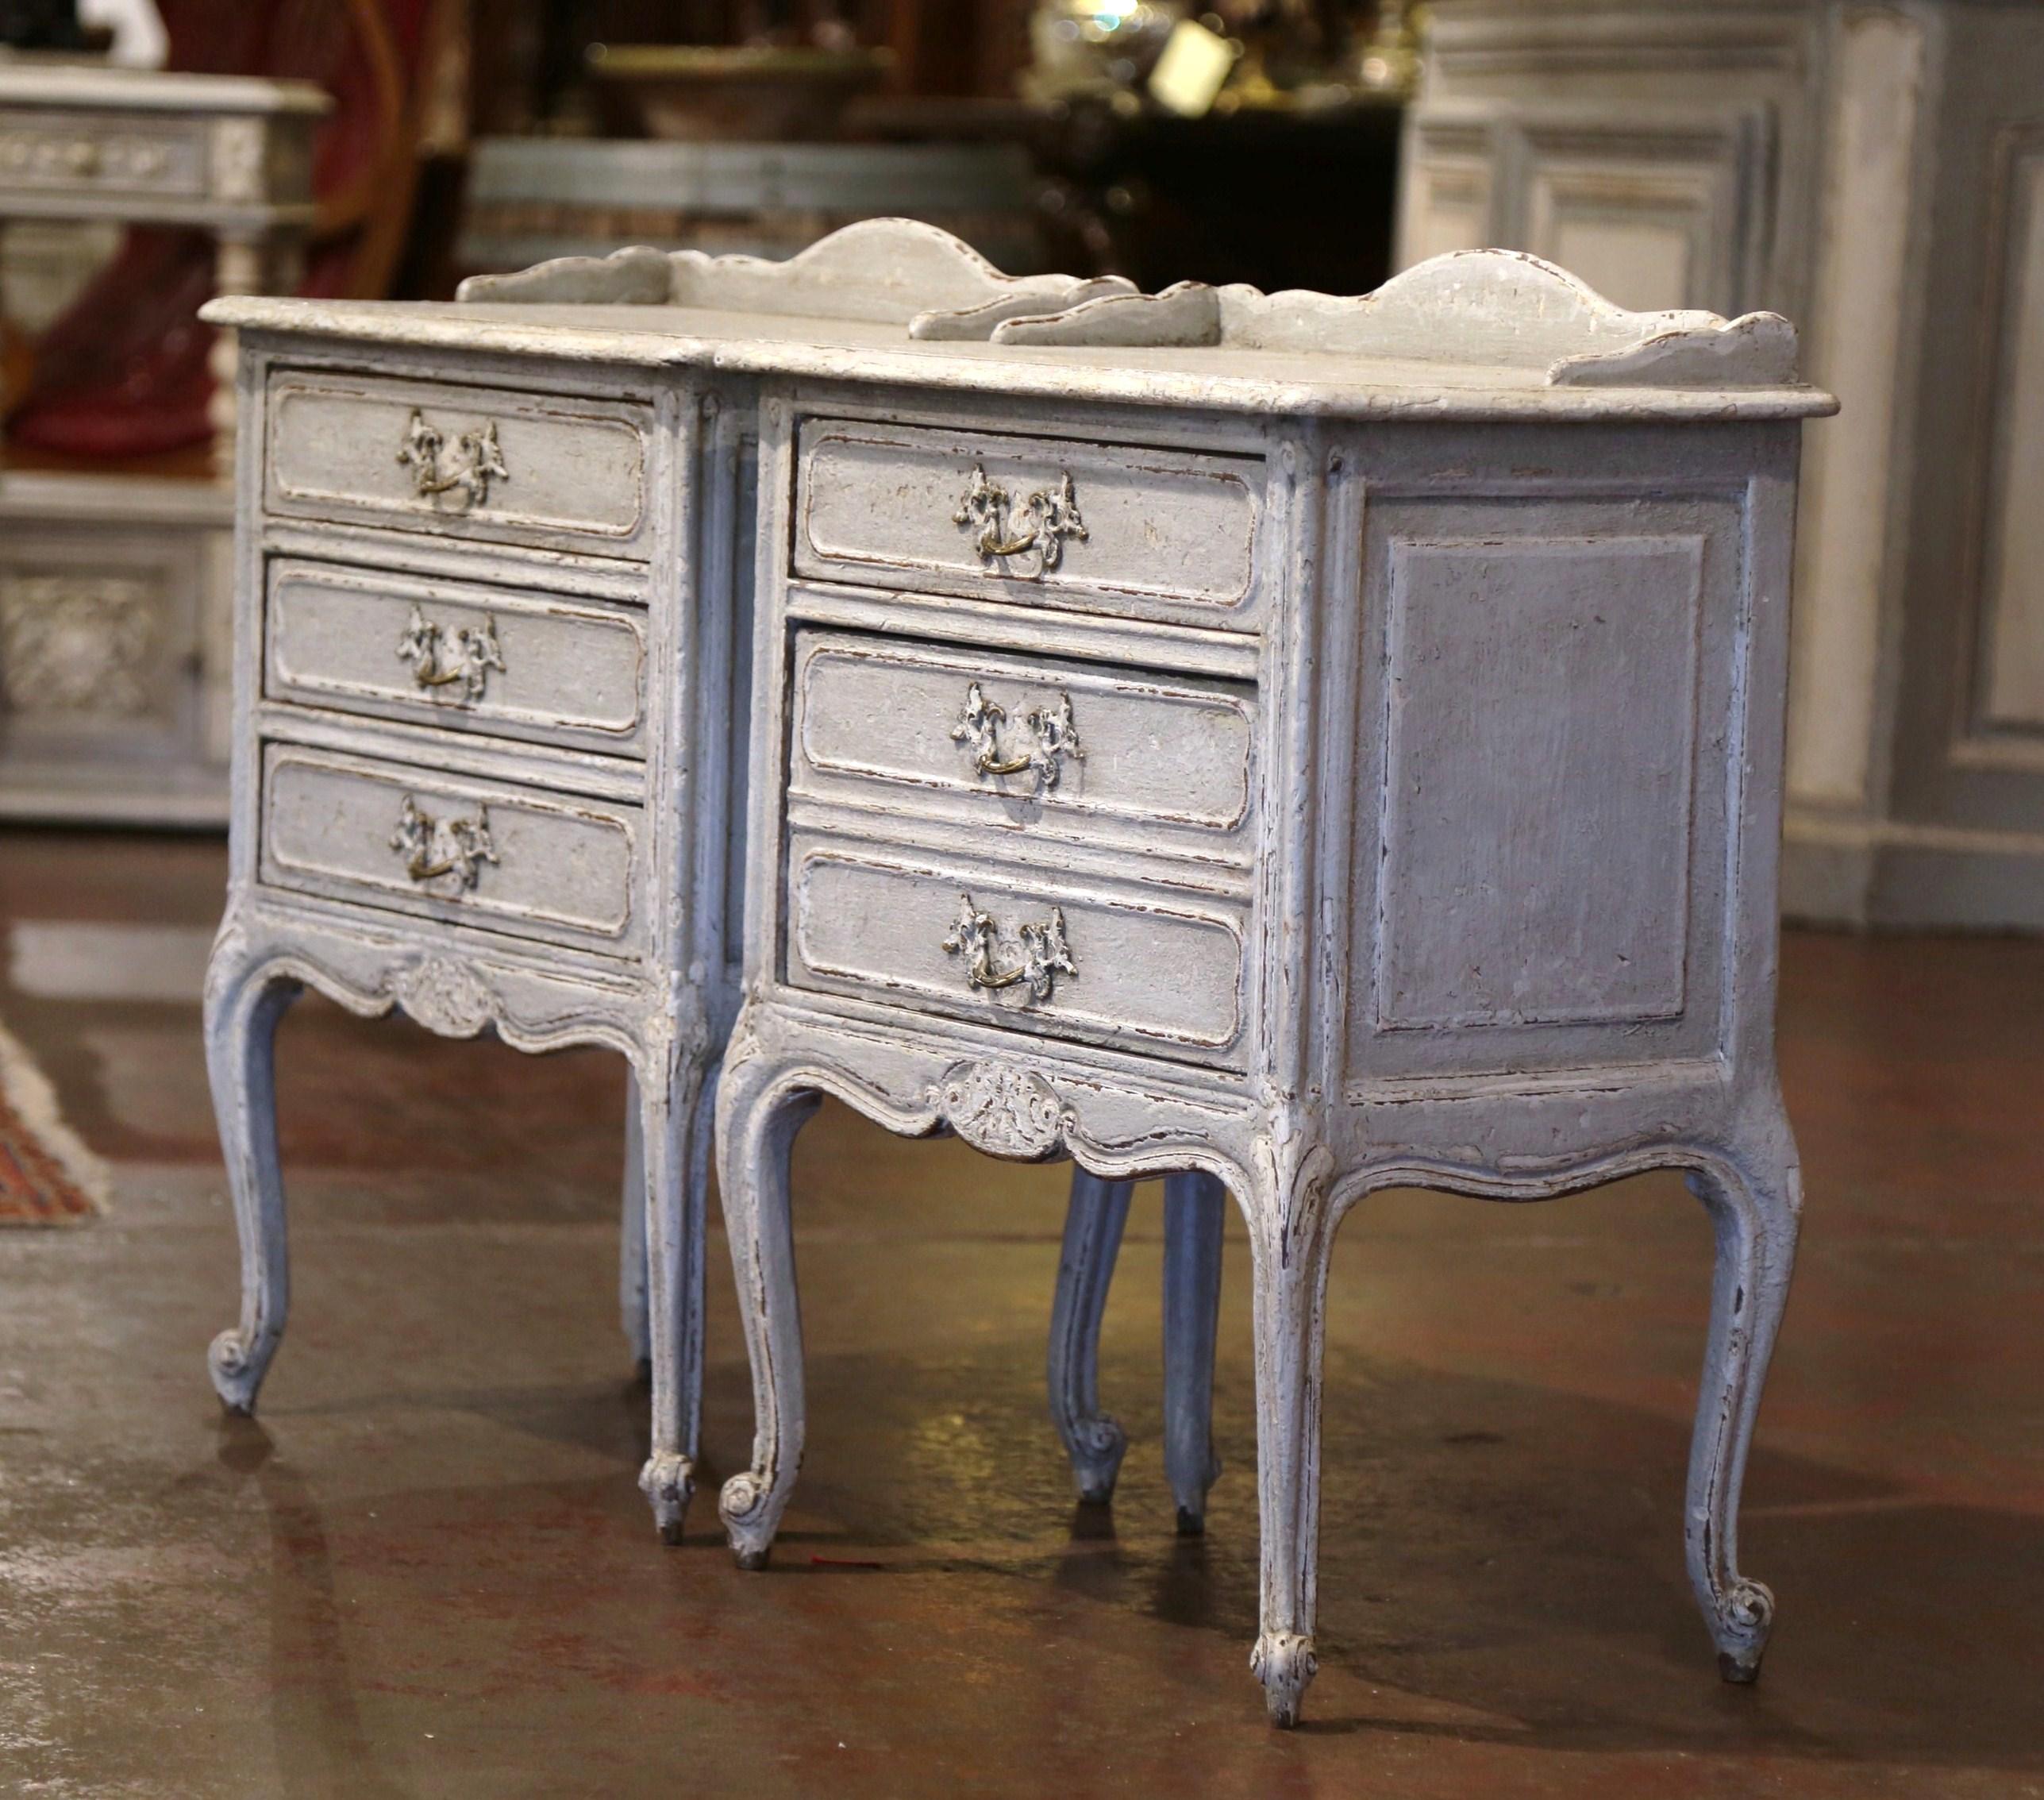 These elegant antique nightstands were created in France, circa 1900. Each Louis XV bedside table stands on cabriole legs decorated with acanthus leaves at the shoulder over a scalloped apron with a carved shell in the center. Both cabinets have